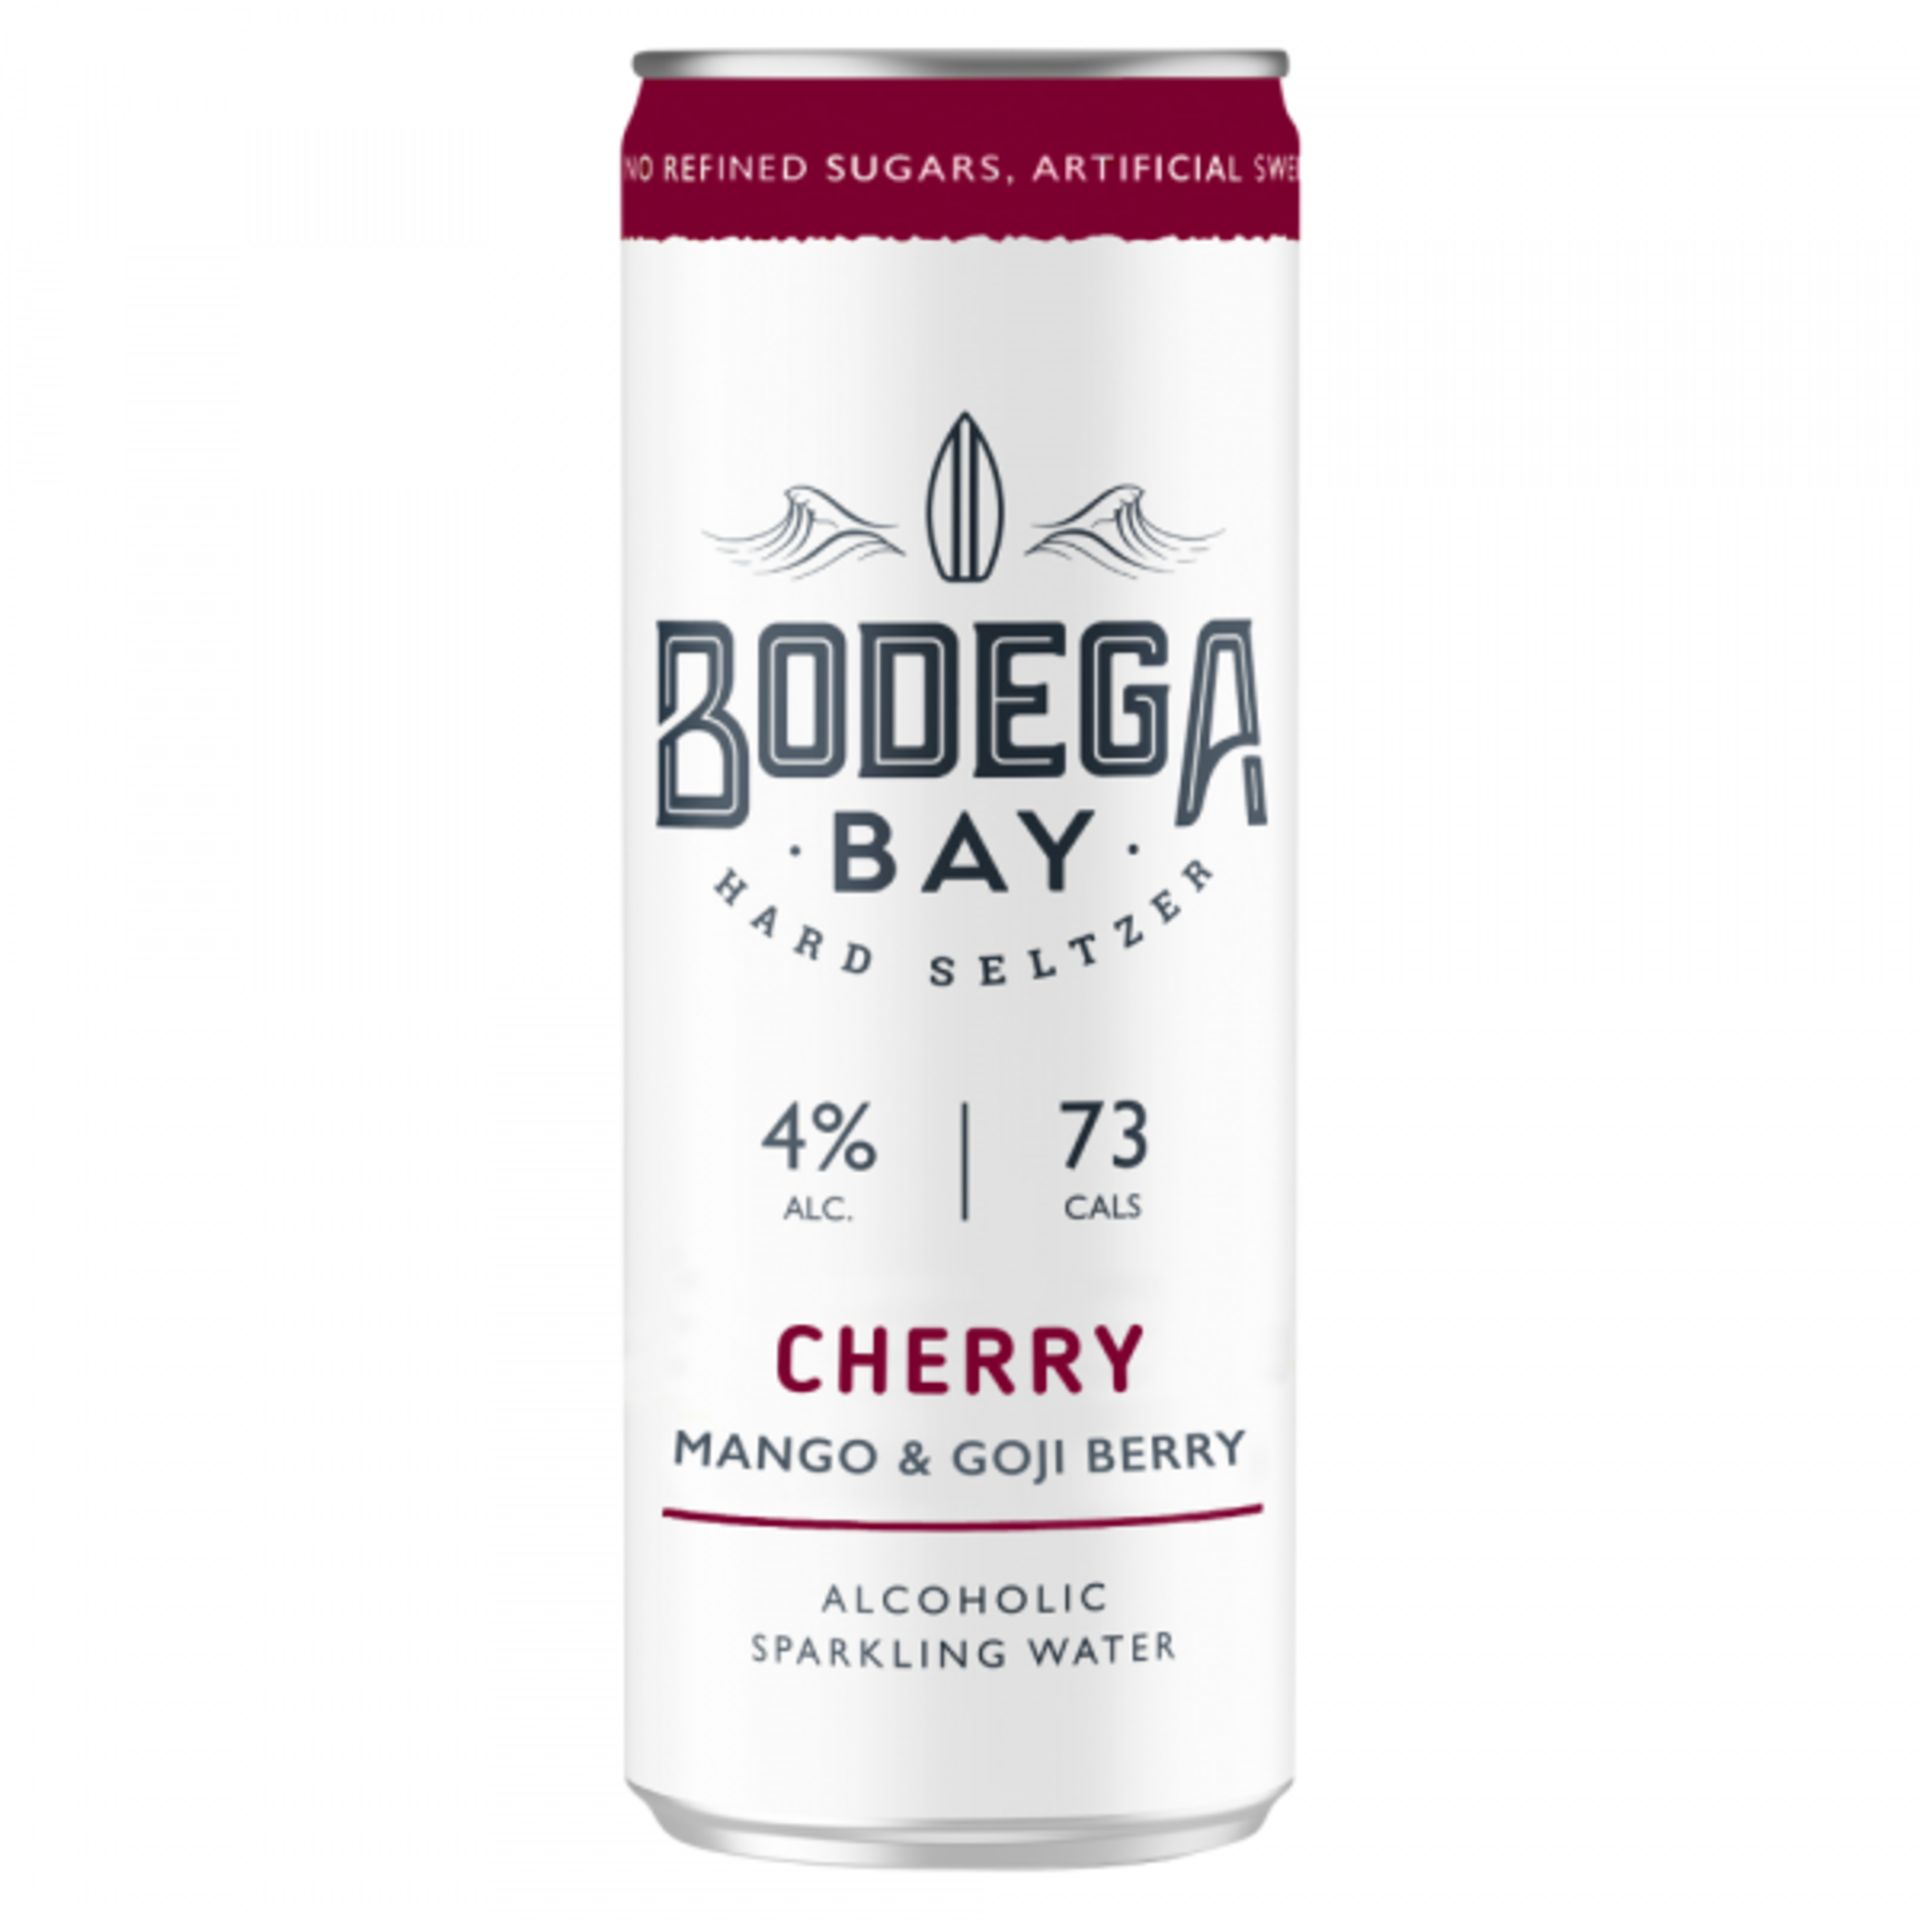 1,080 x Cans of Bodega Bay Hard Seltzer 250ml Alcoholic Sparkling Water Drinks - RESALE JOB LOT - Image 16 of 22